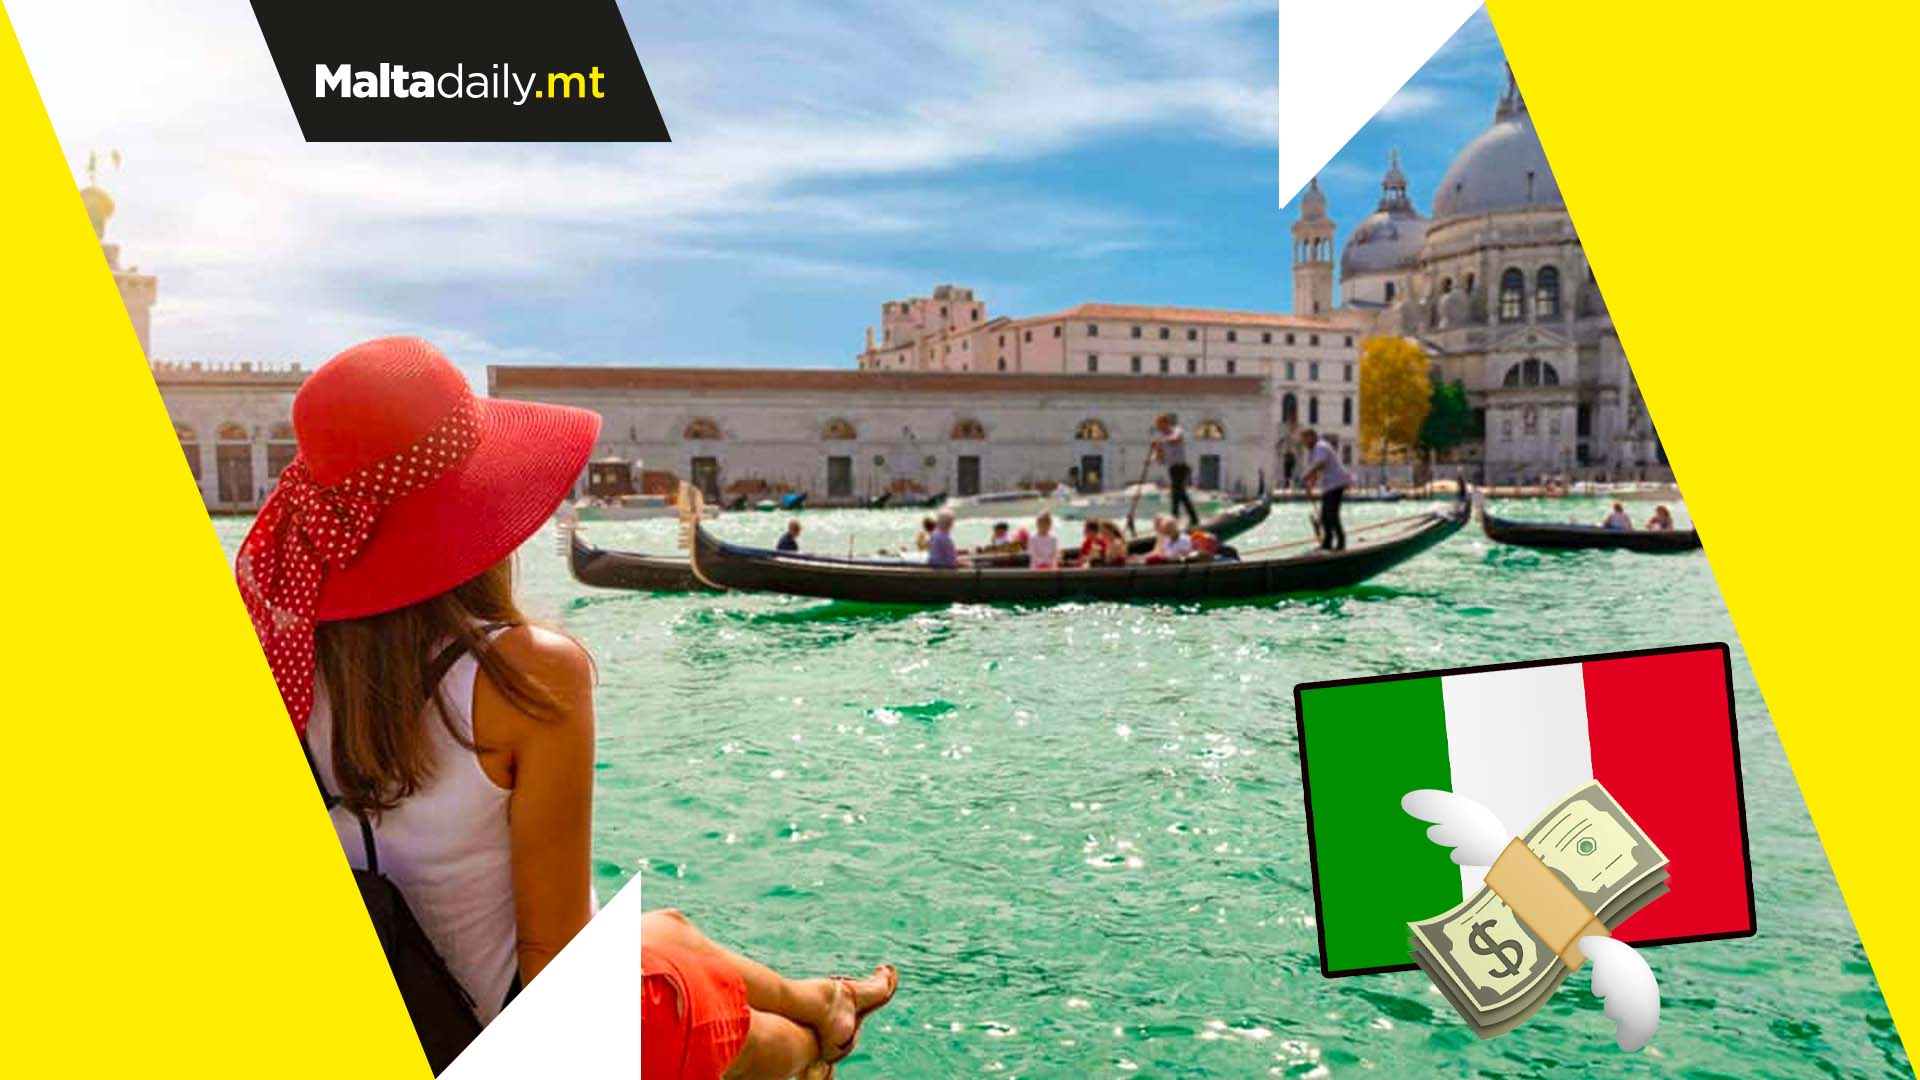 You will have to pay between €3 to €10 to enter Venice as of January 2023